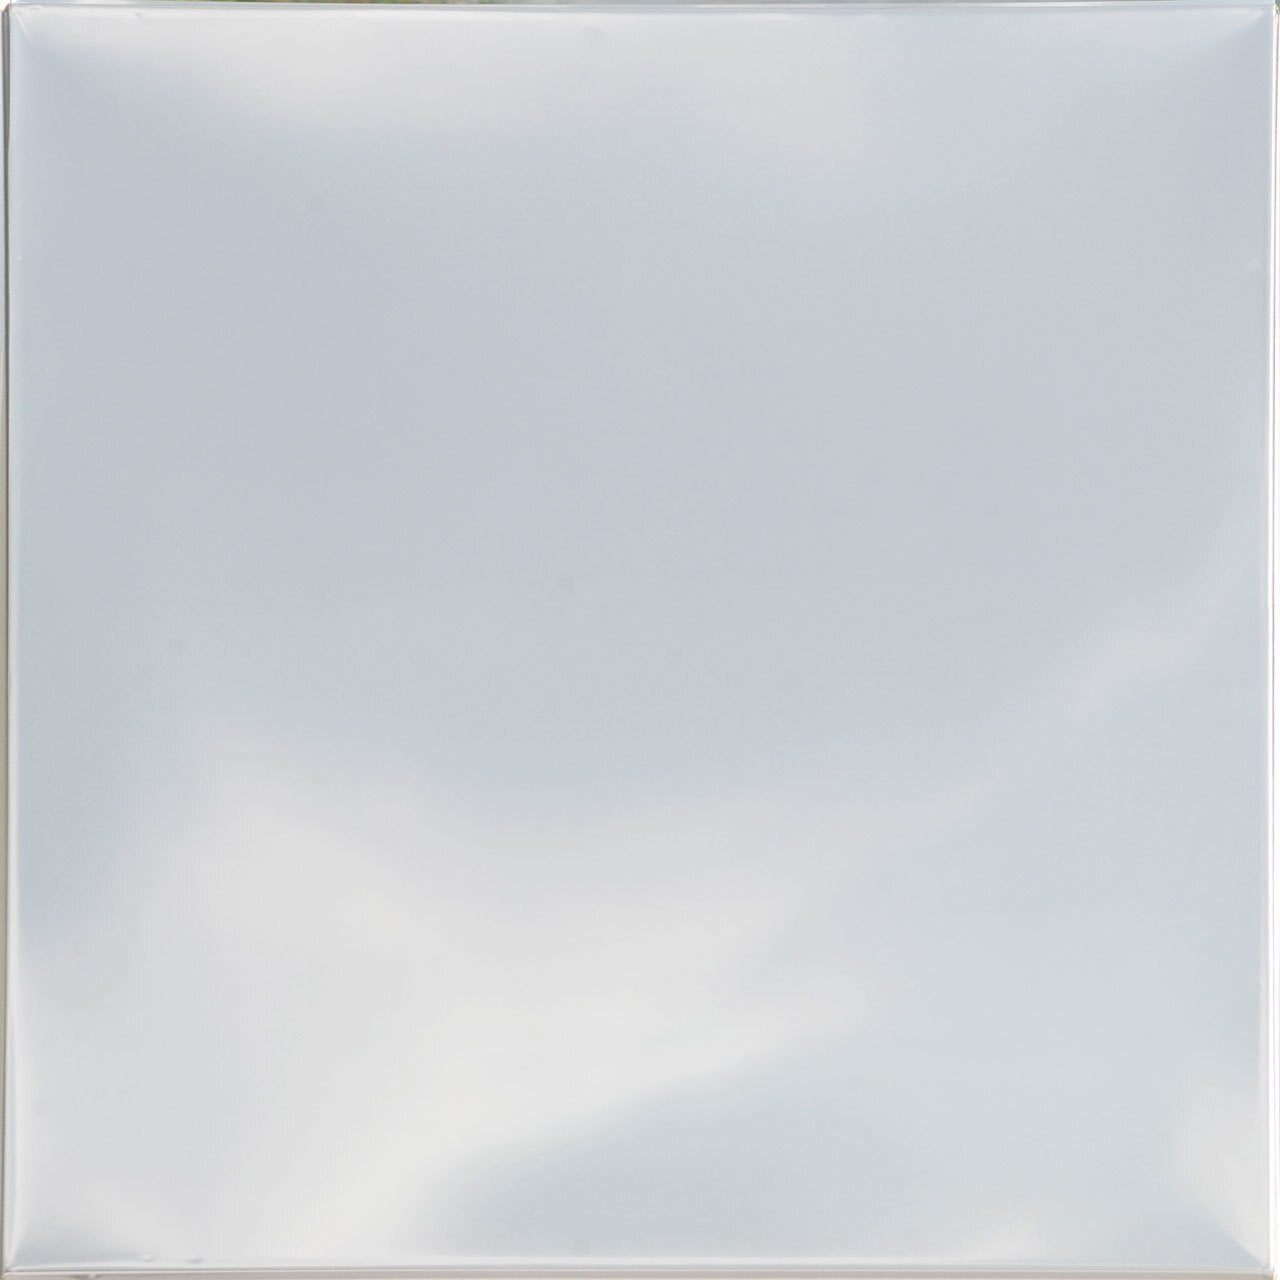 Smooth - 24 in. x 24 in. - Revealed Edge Lay-in Aluminum Ceiling Tile